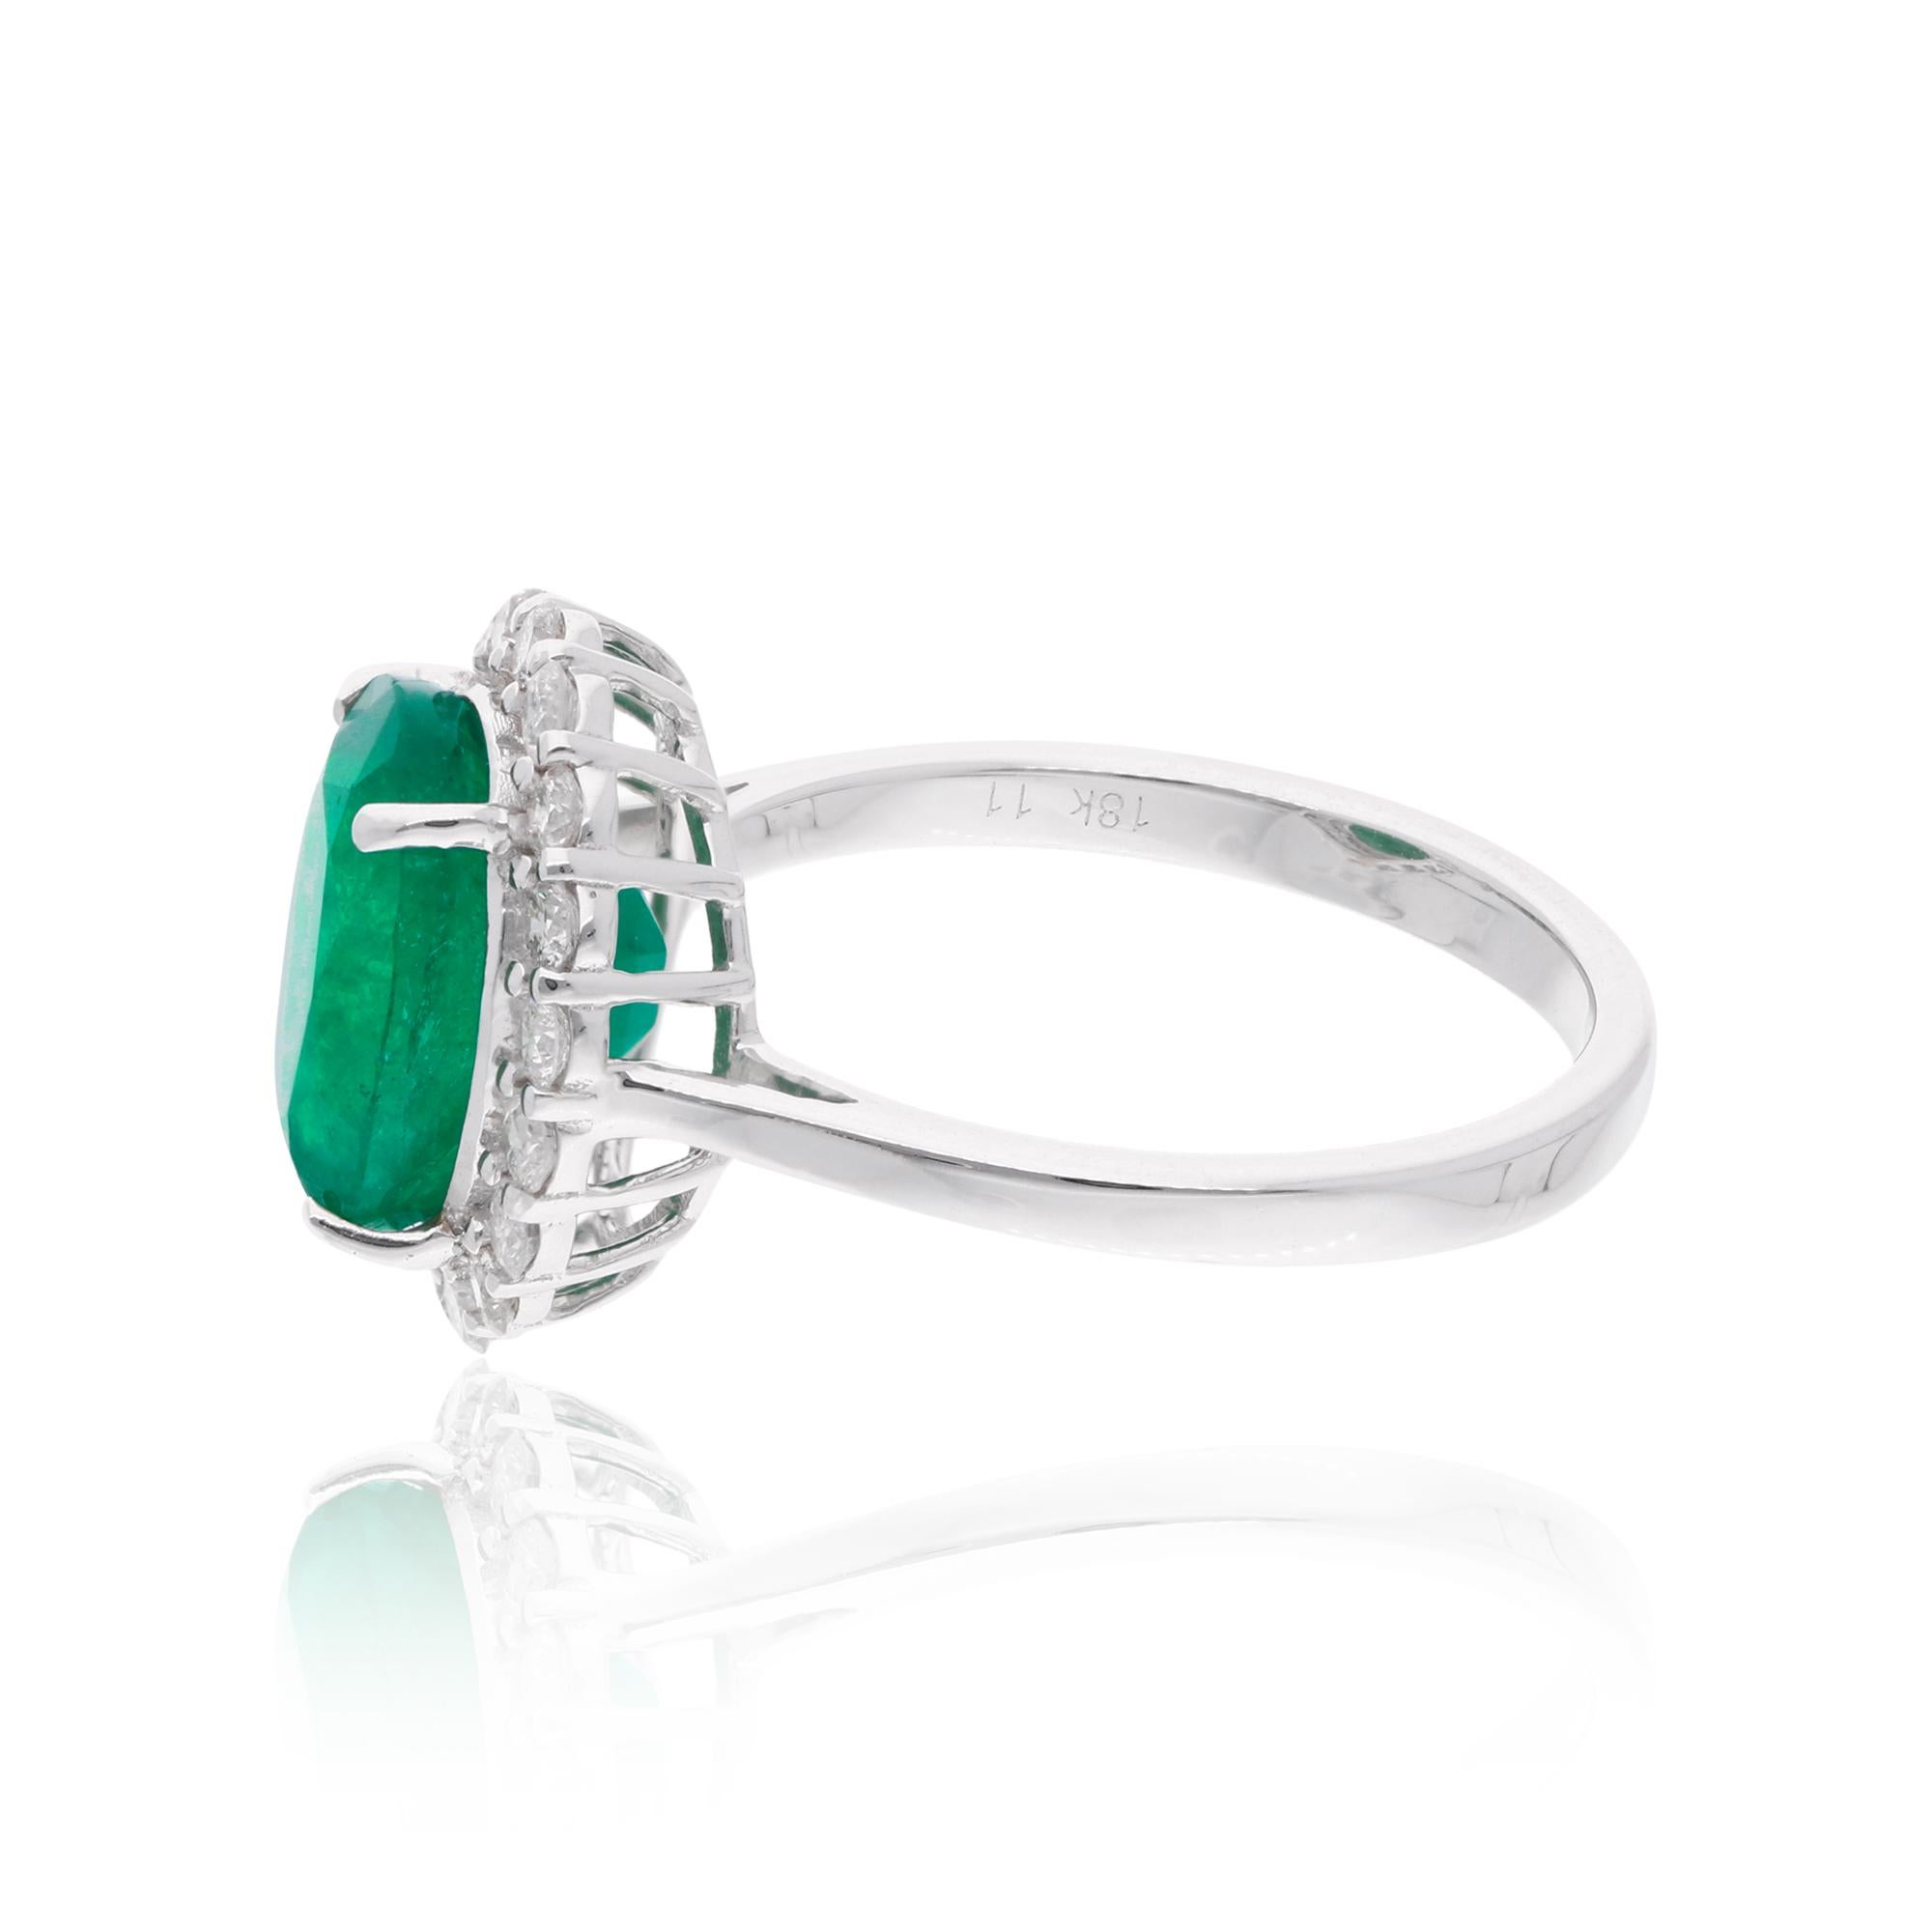 Item Code :- SER-22611
Gross Wt. :- 4.41 gm
18k White Gold Wt. :- 3.52 gm
Natural Diamond Wt. :- 0.50 Ct. ( AVERAGE DIAMOND CLARITY SI1-SI2 & COLOR H-I )
Emerald Wt. :- 3.95 Ct. 
Ring Size :- 7 US & All size available

✦